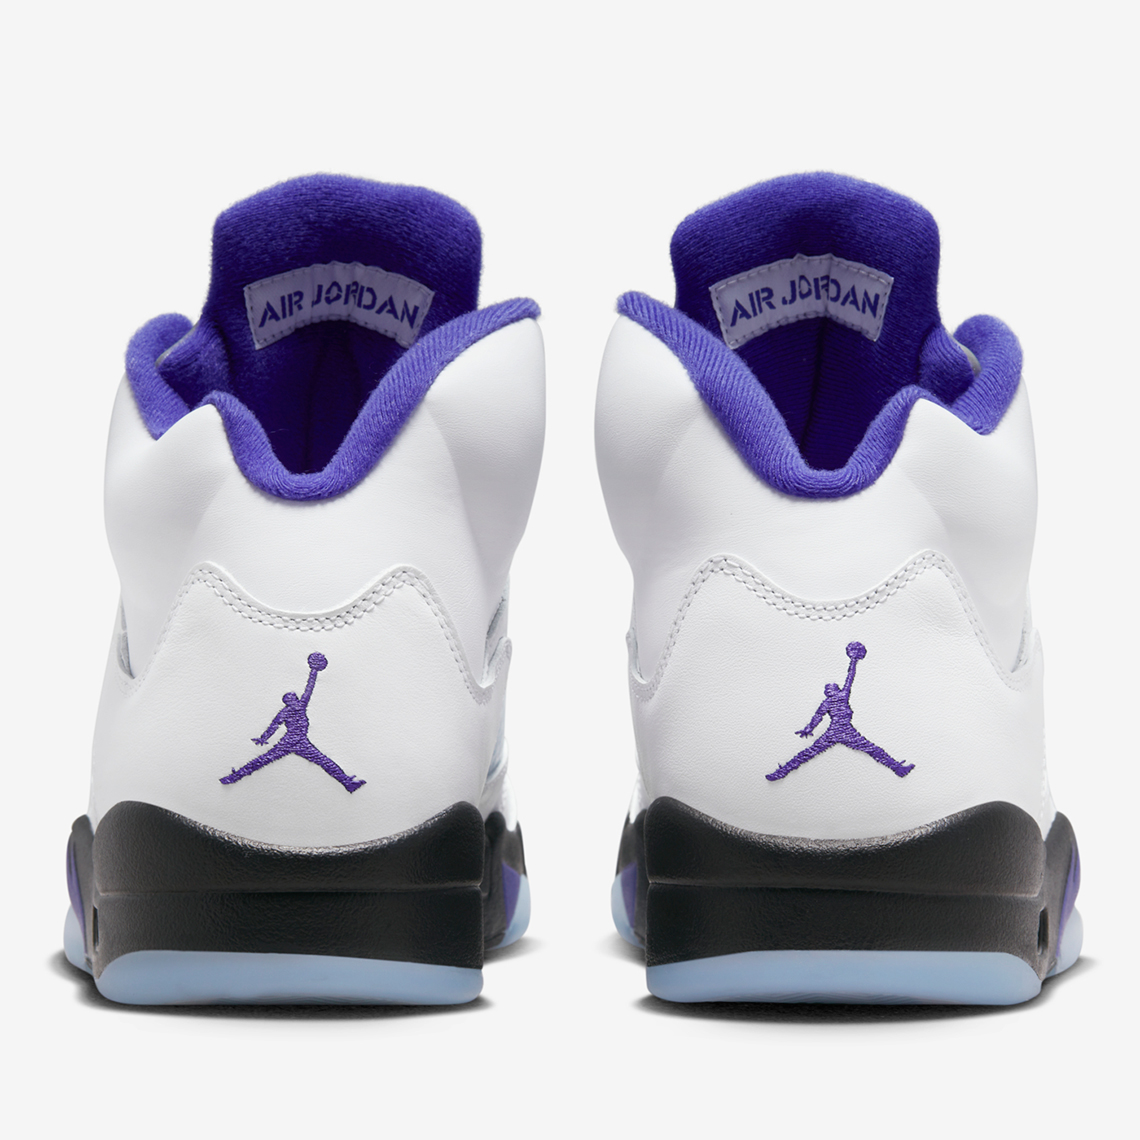 The Nike This year certainly hasnt been short of Jordan 5 colourways is currently only listed in the Concord Dd0587 141 4